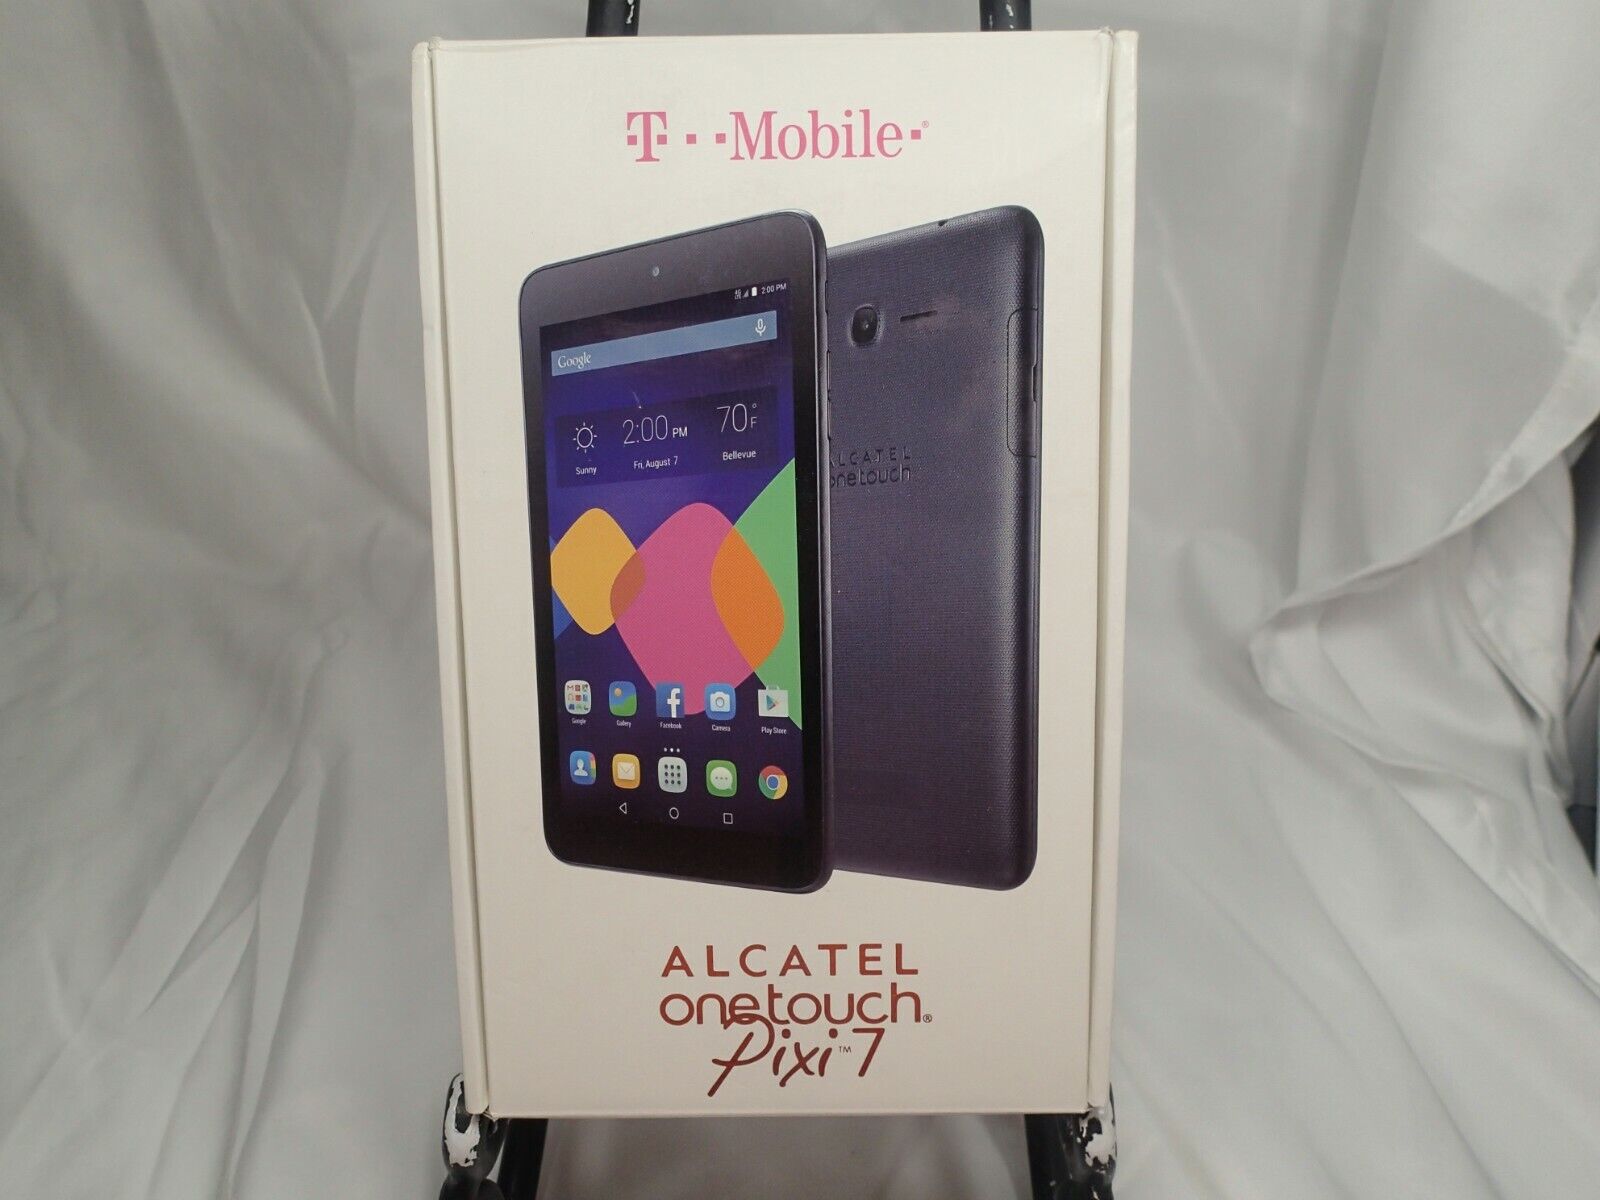 Alcatel One Touch Pixi 7 Tablet T-Mobile 4G Wifi Black 7" Excellent cond w/ Box